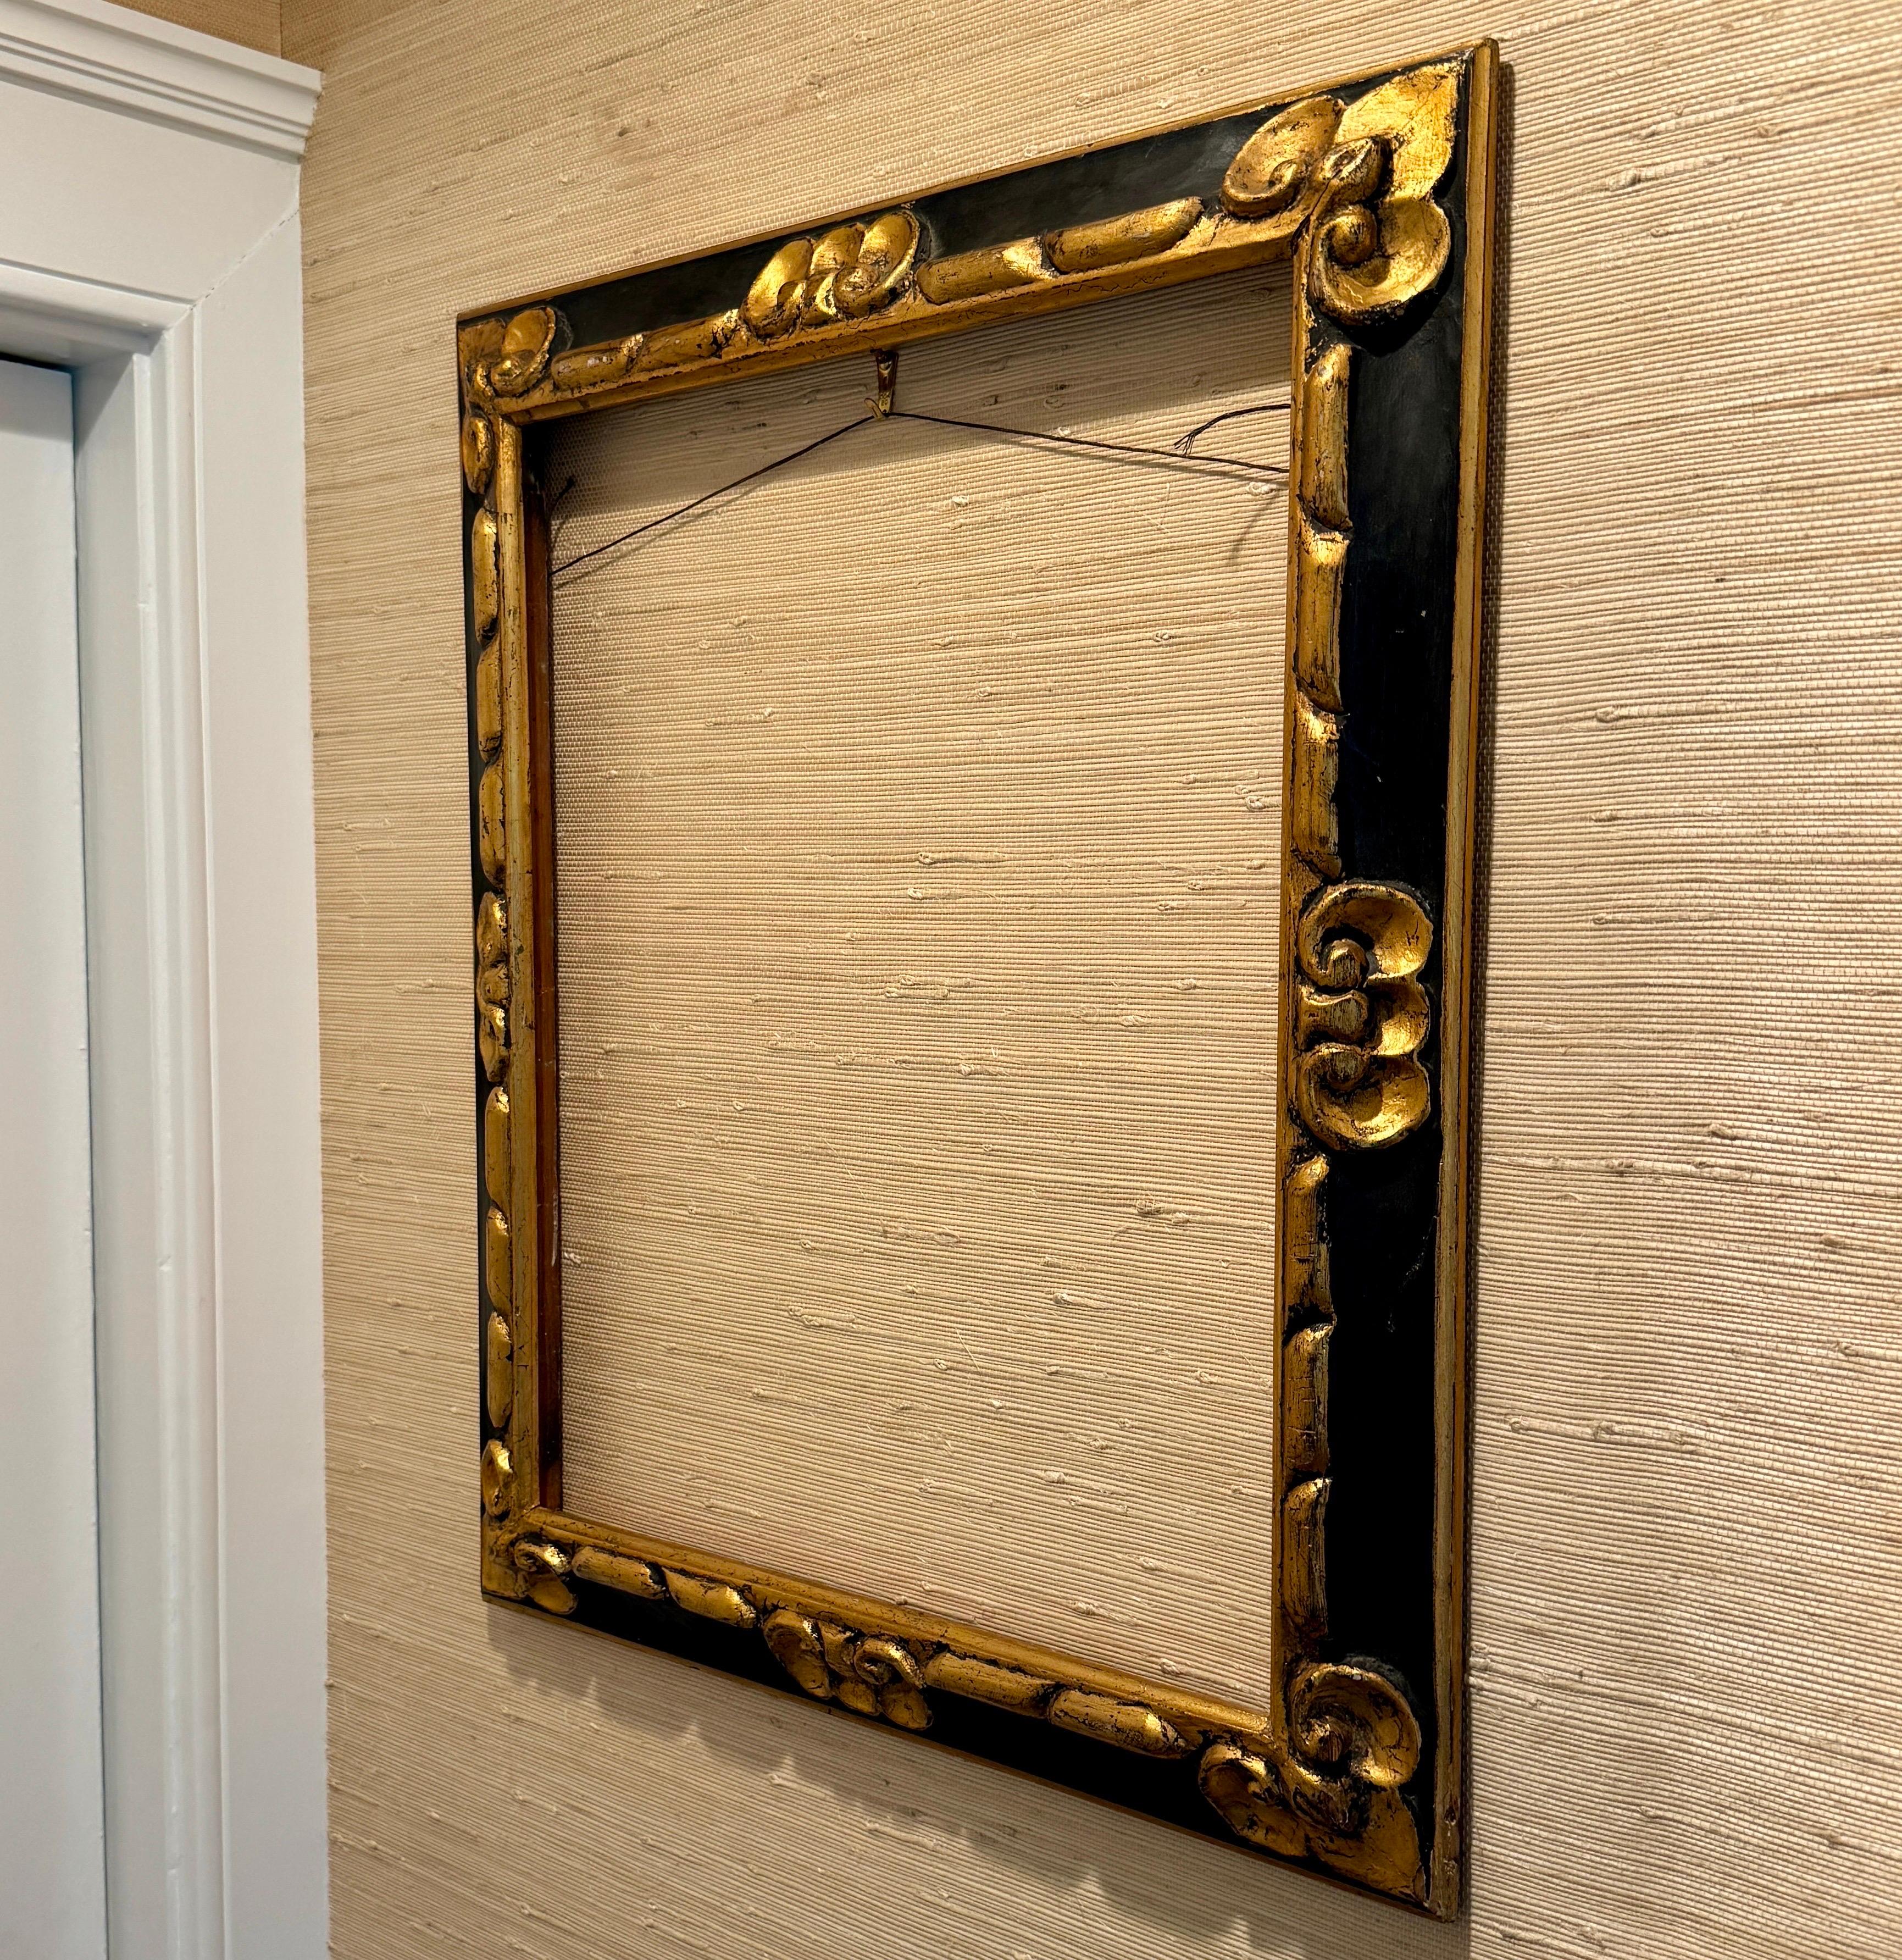 Hand-Crafted Italian Florentine Gold Black Gilded Wood Art Frame Circa 1950's For Sale